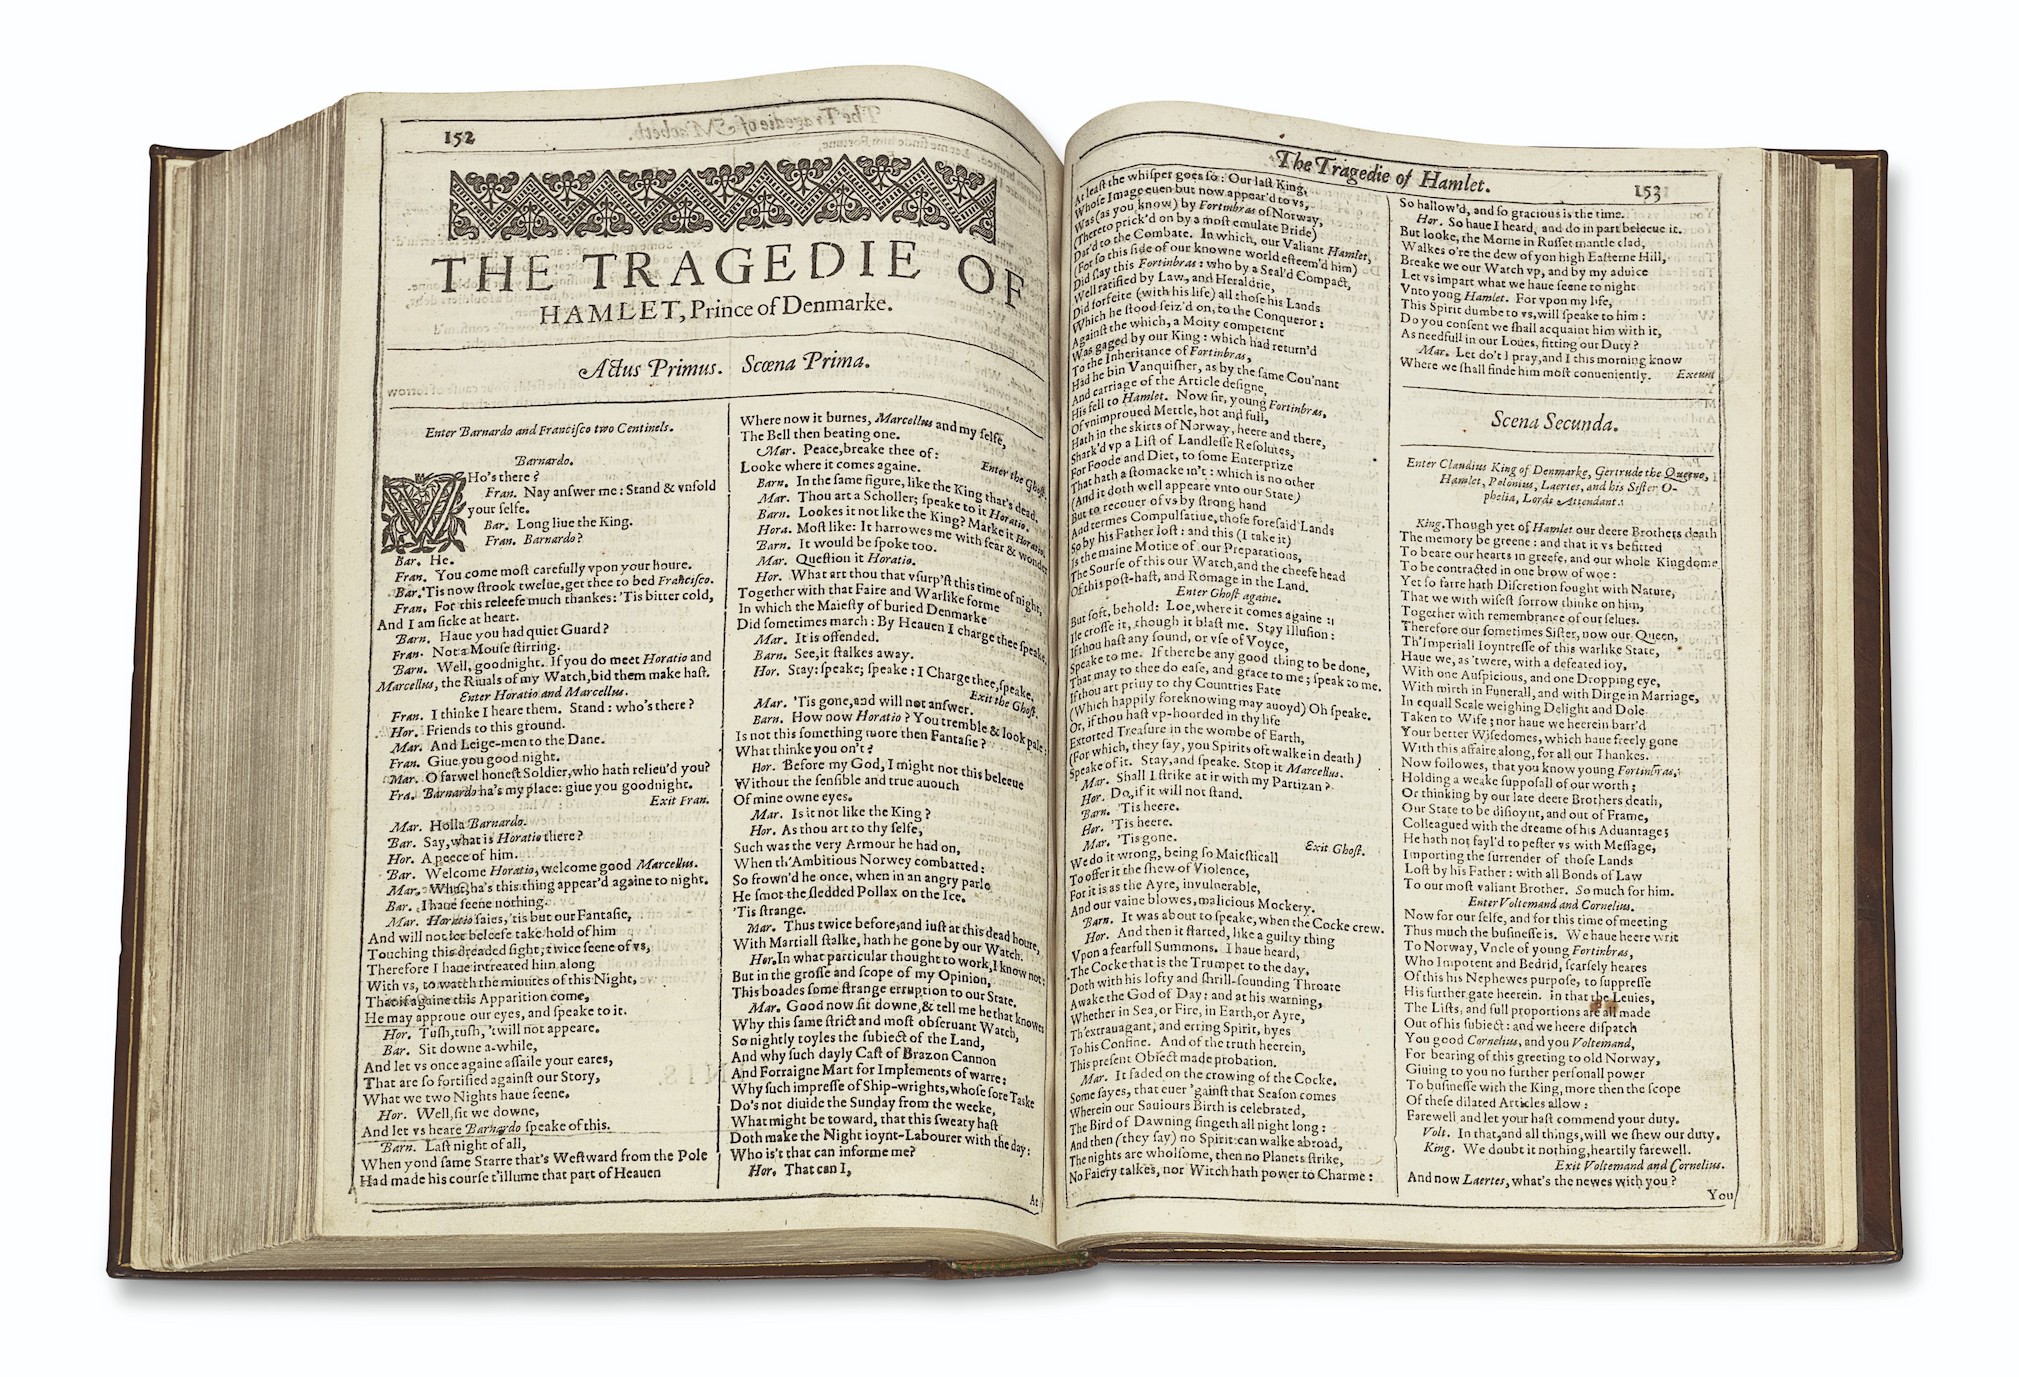 2020 NYR 19032 0012 007shakespeare william comedies histories and tragedies published accordi100833